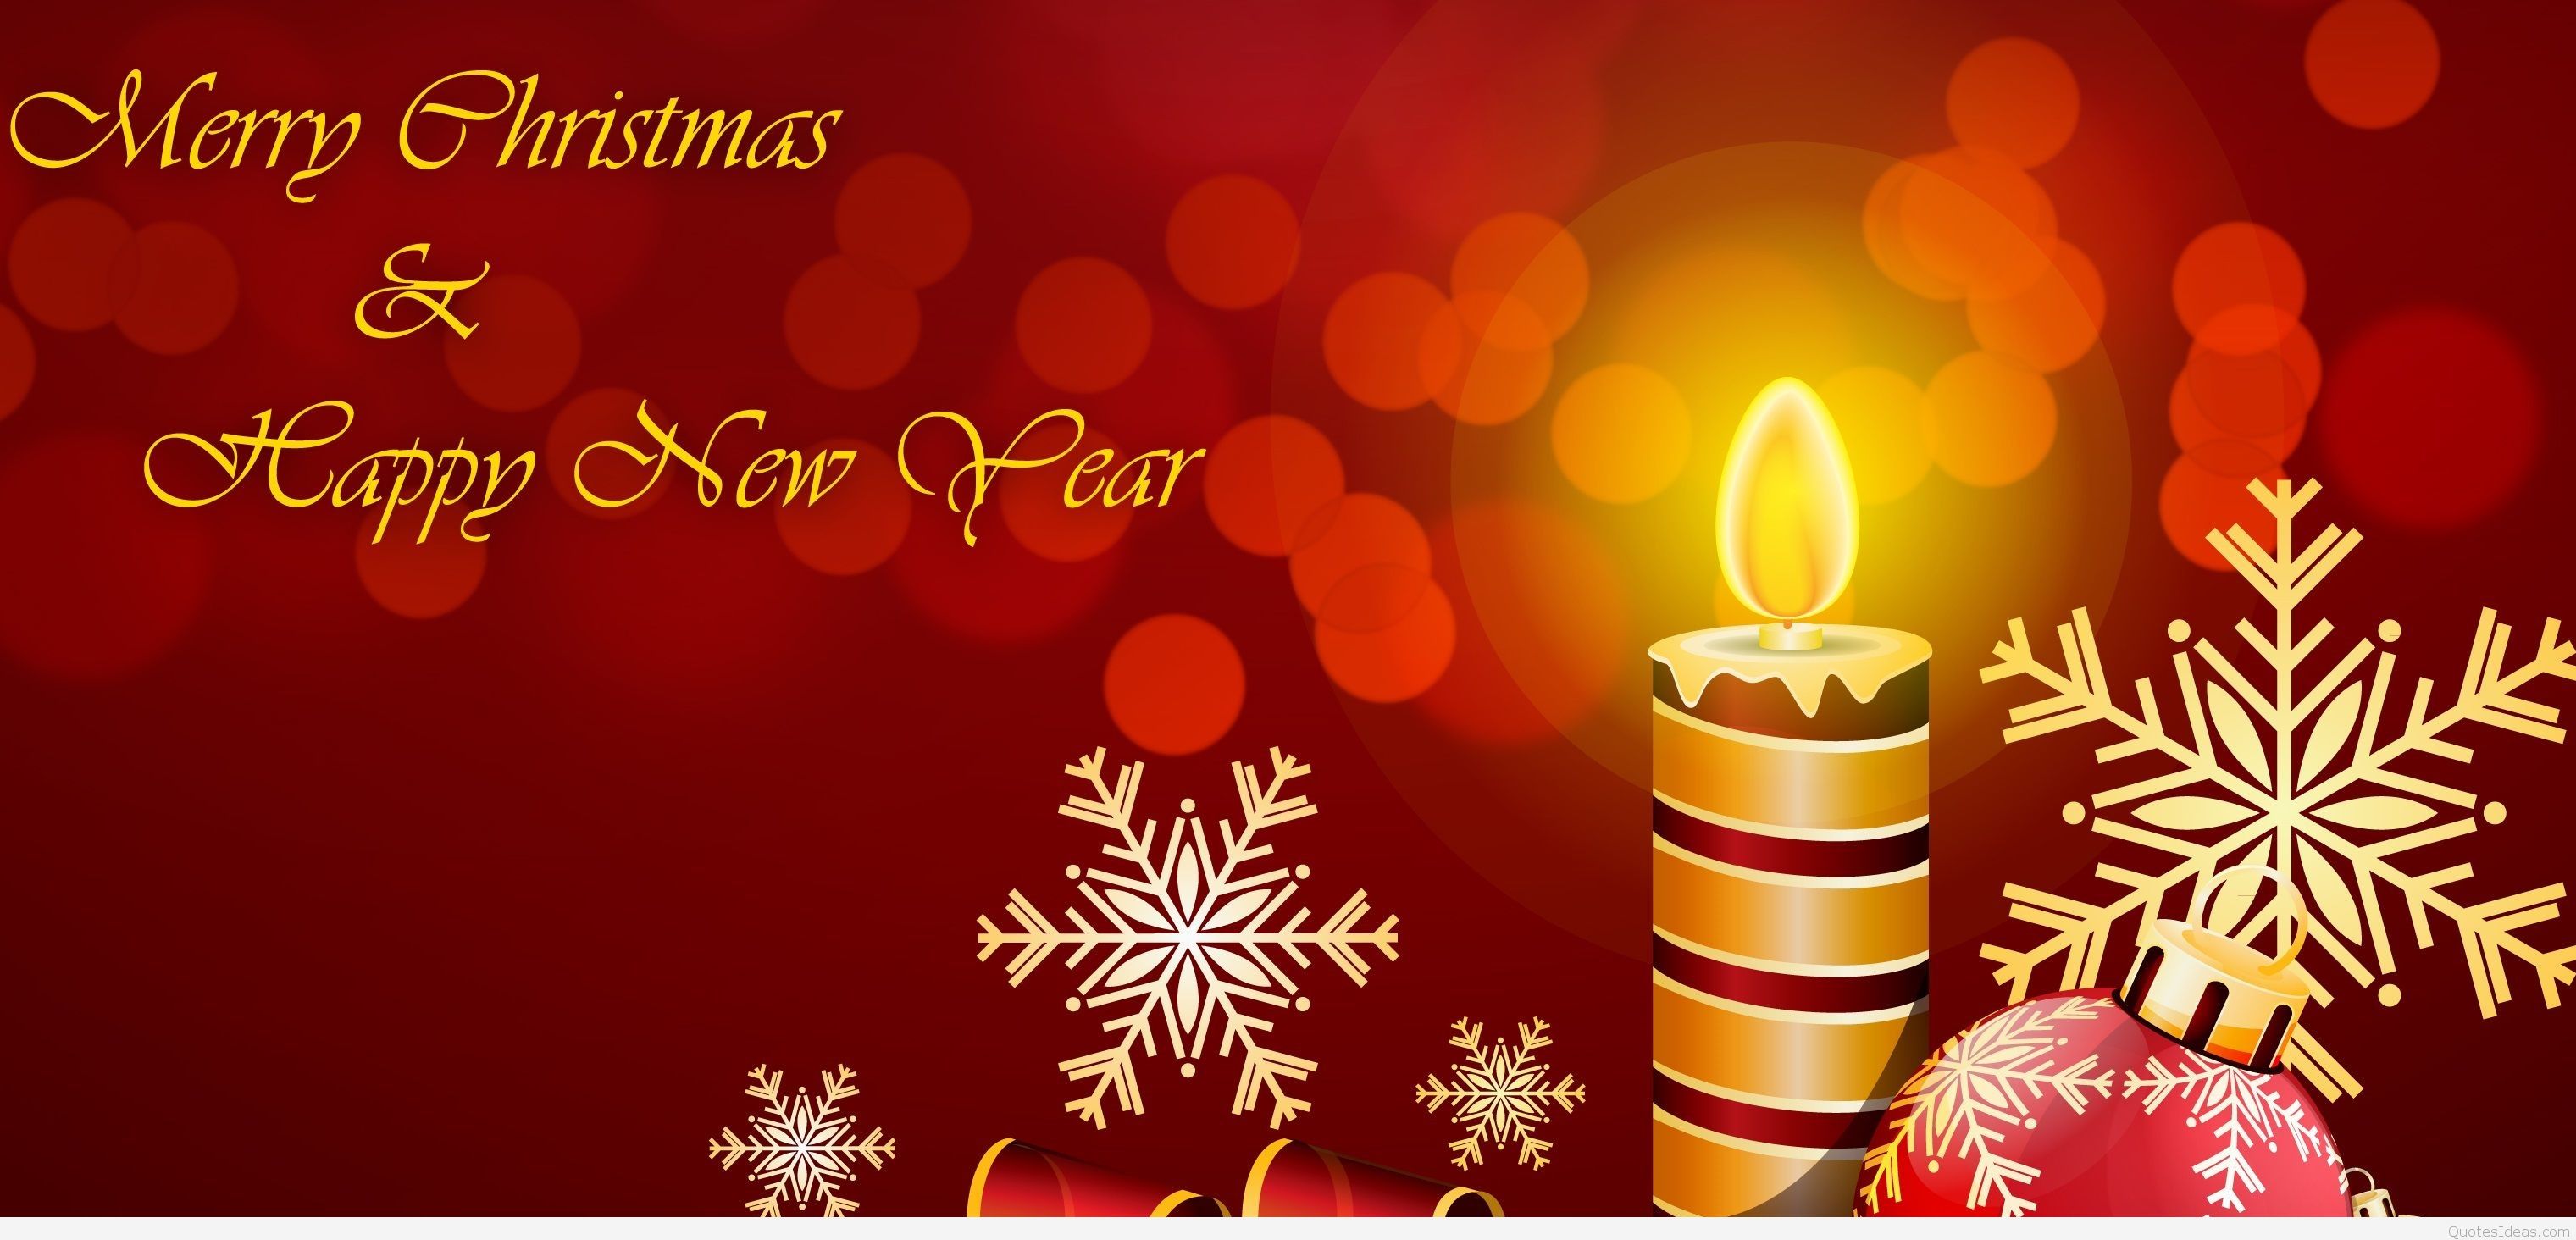 Merry Christmas And Happy New Year Hd Candle Wallpaper - Wishing All Our Customers Merry Christmas - HD Wallpaper 